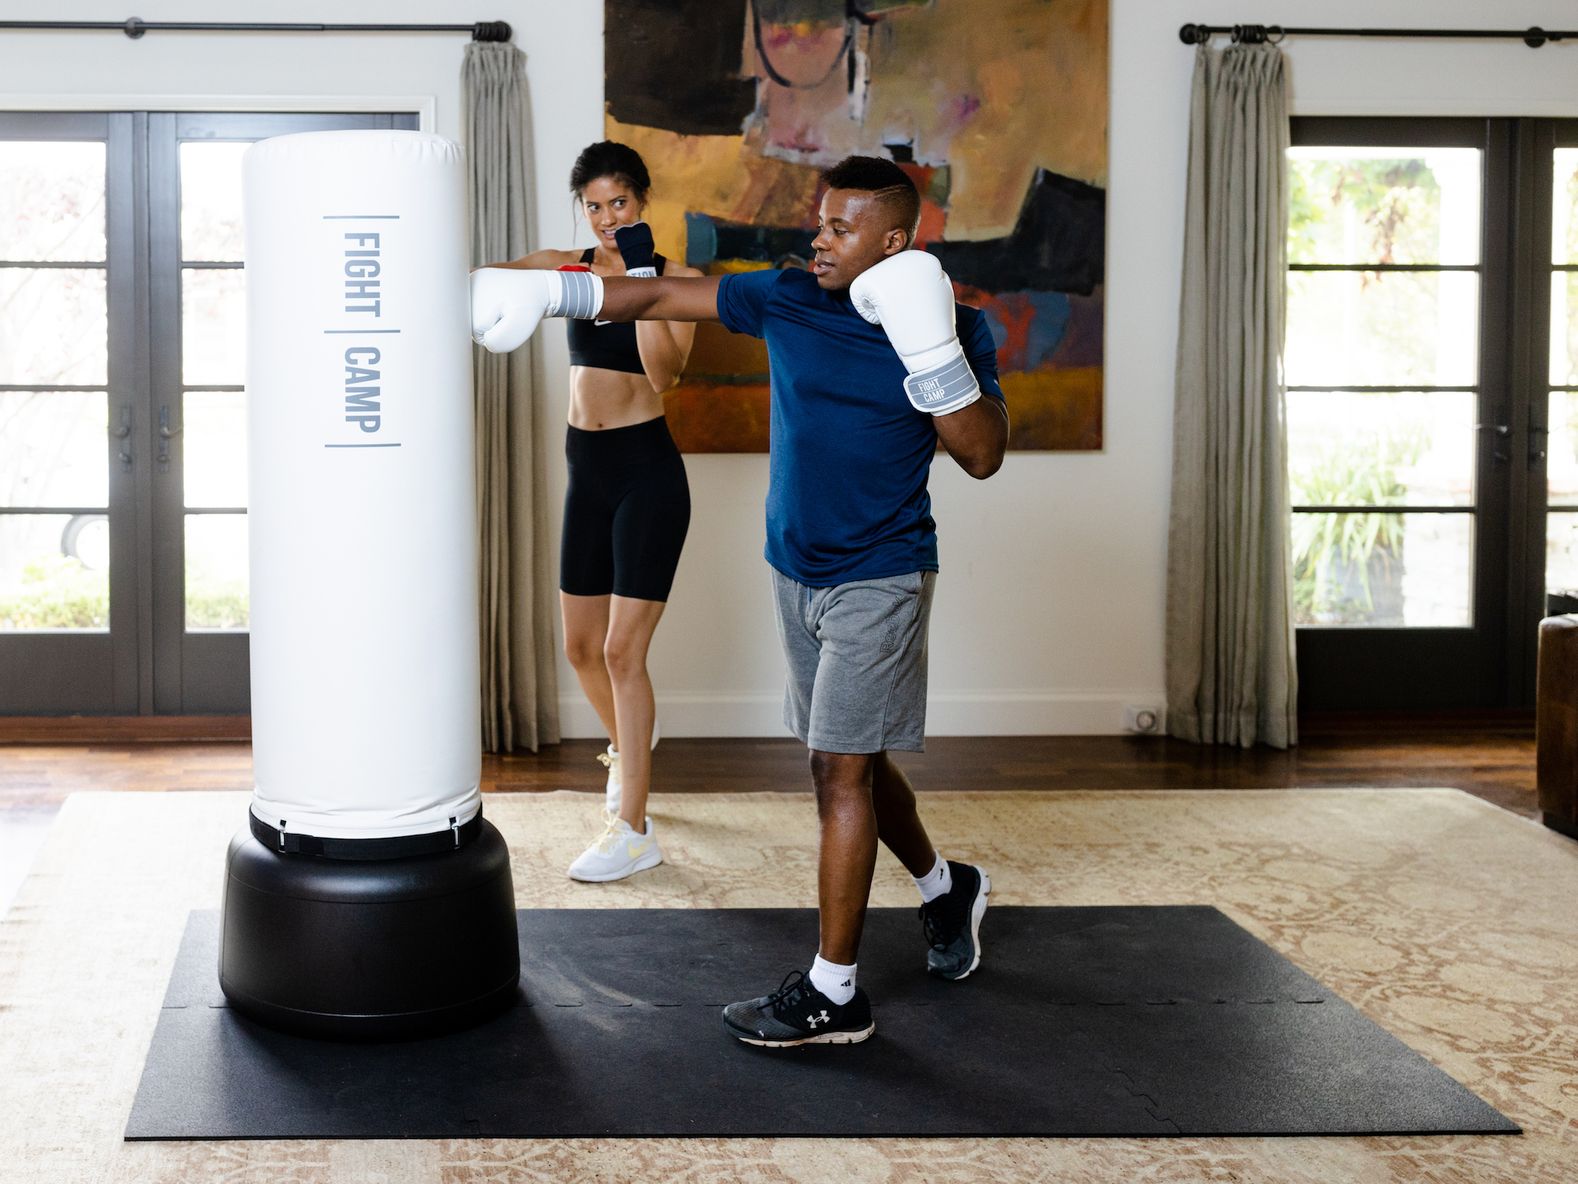 Man and woman punching FightCamp bag